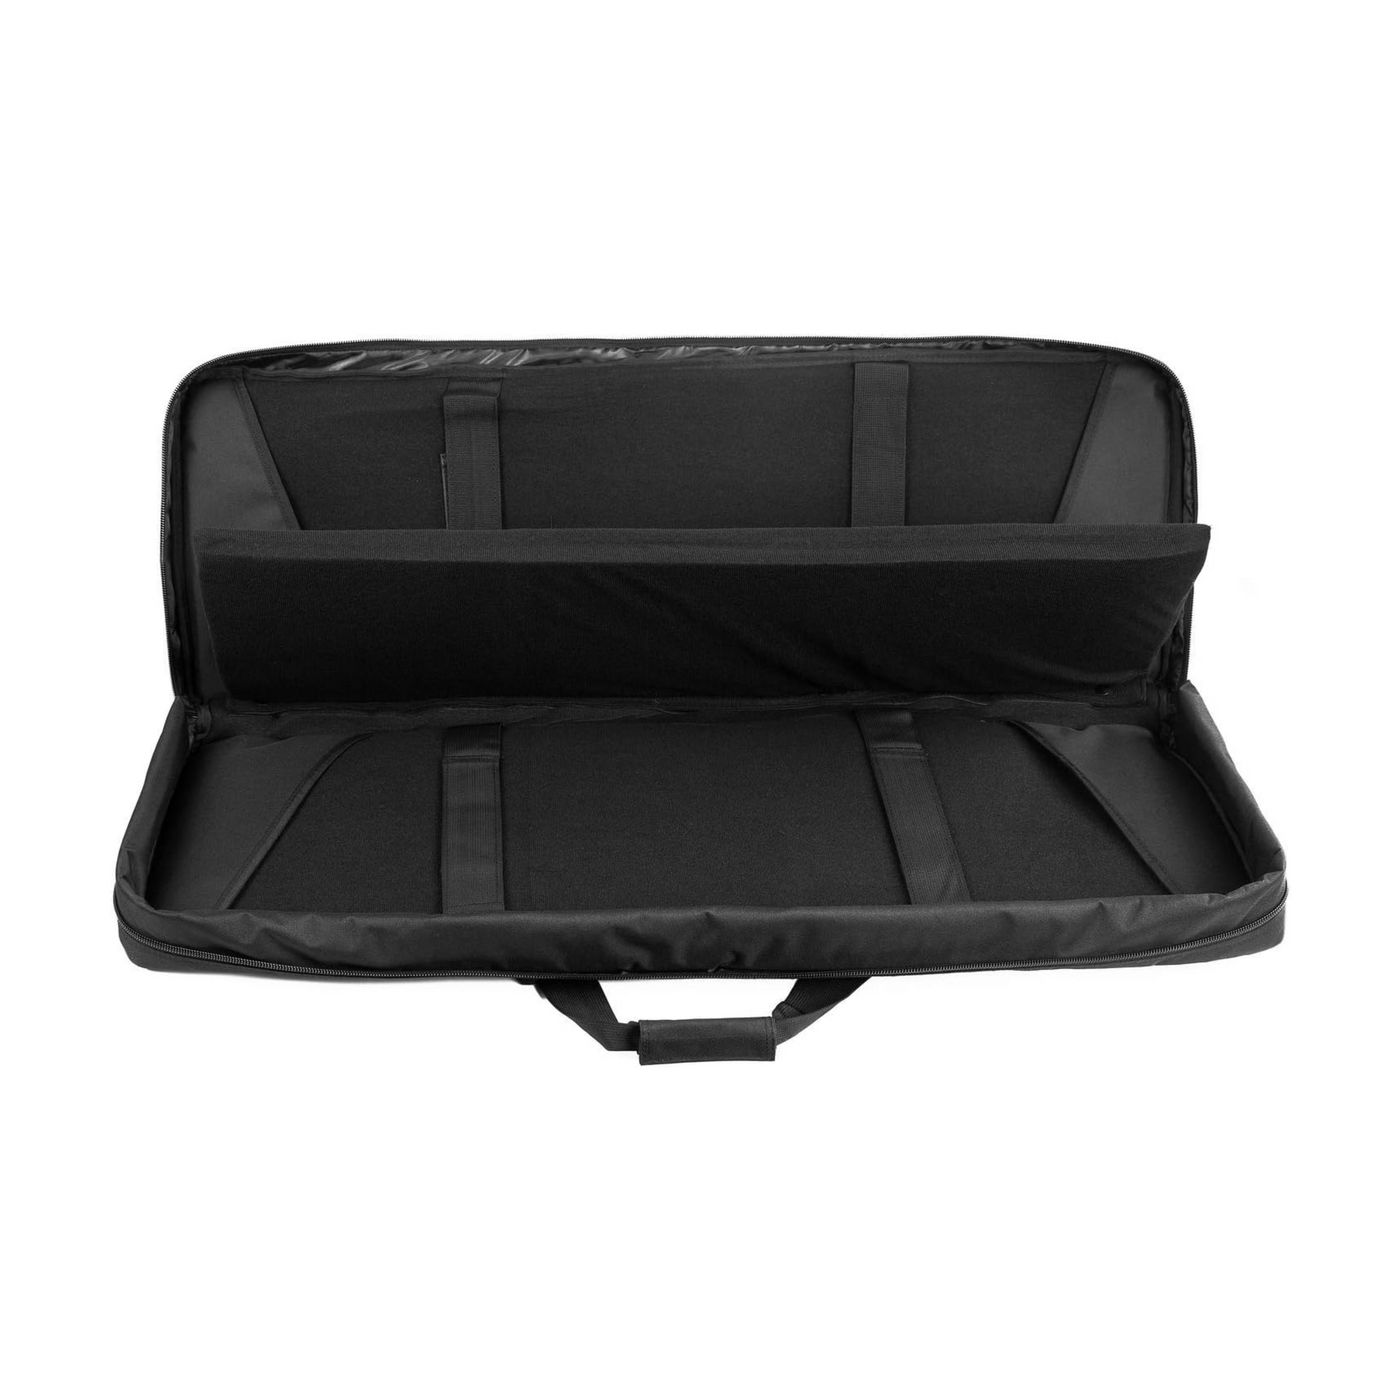 Waterproof padded hunting rifle case with dual storage for 42-inch American Classic guns